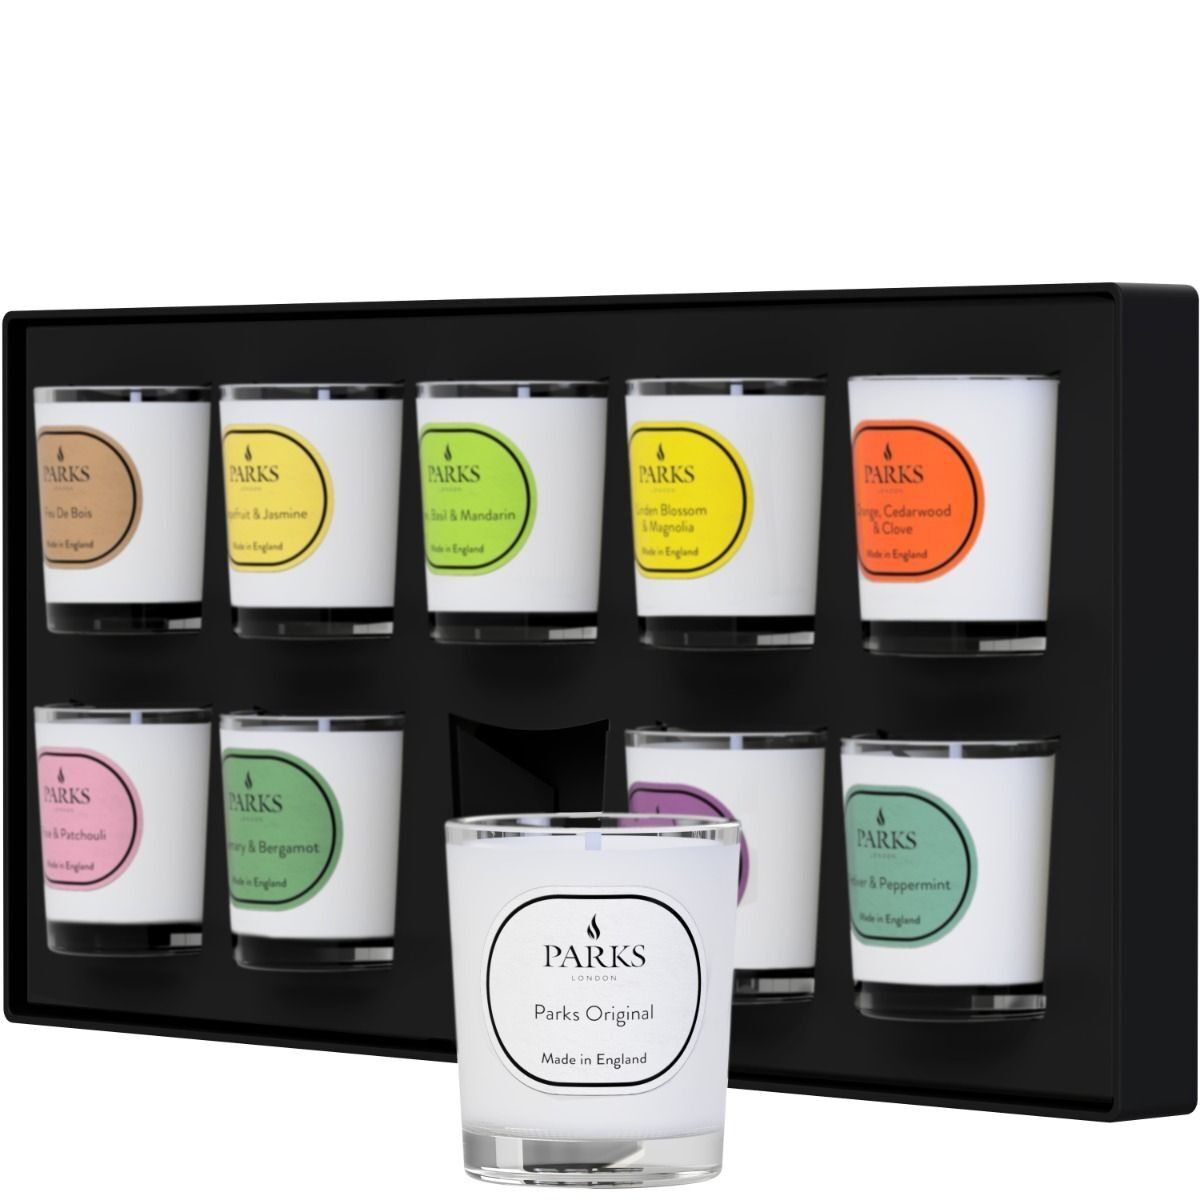 PARKS LONDON 3 WICK CANDLE ORIGINAL - NORD BLVD